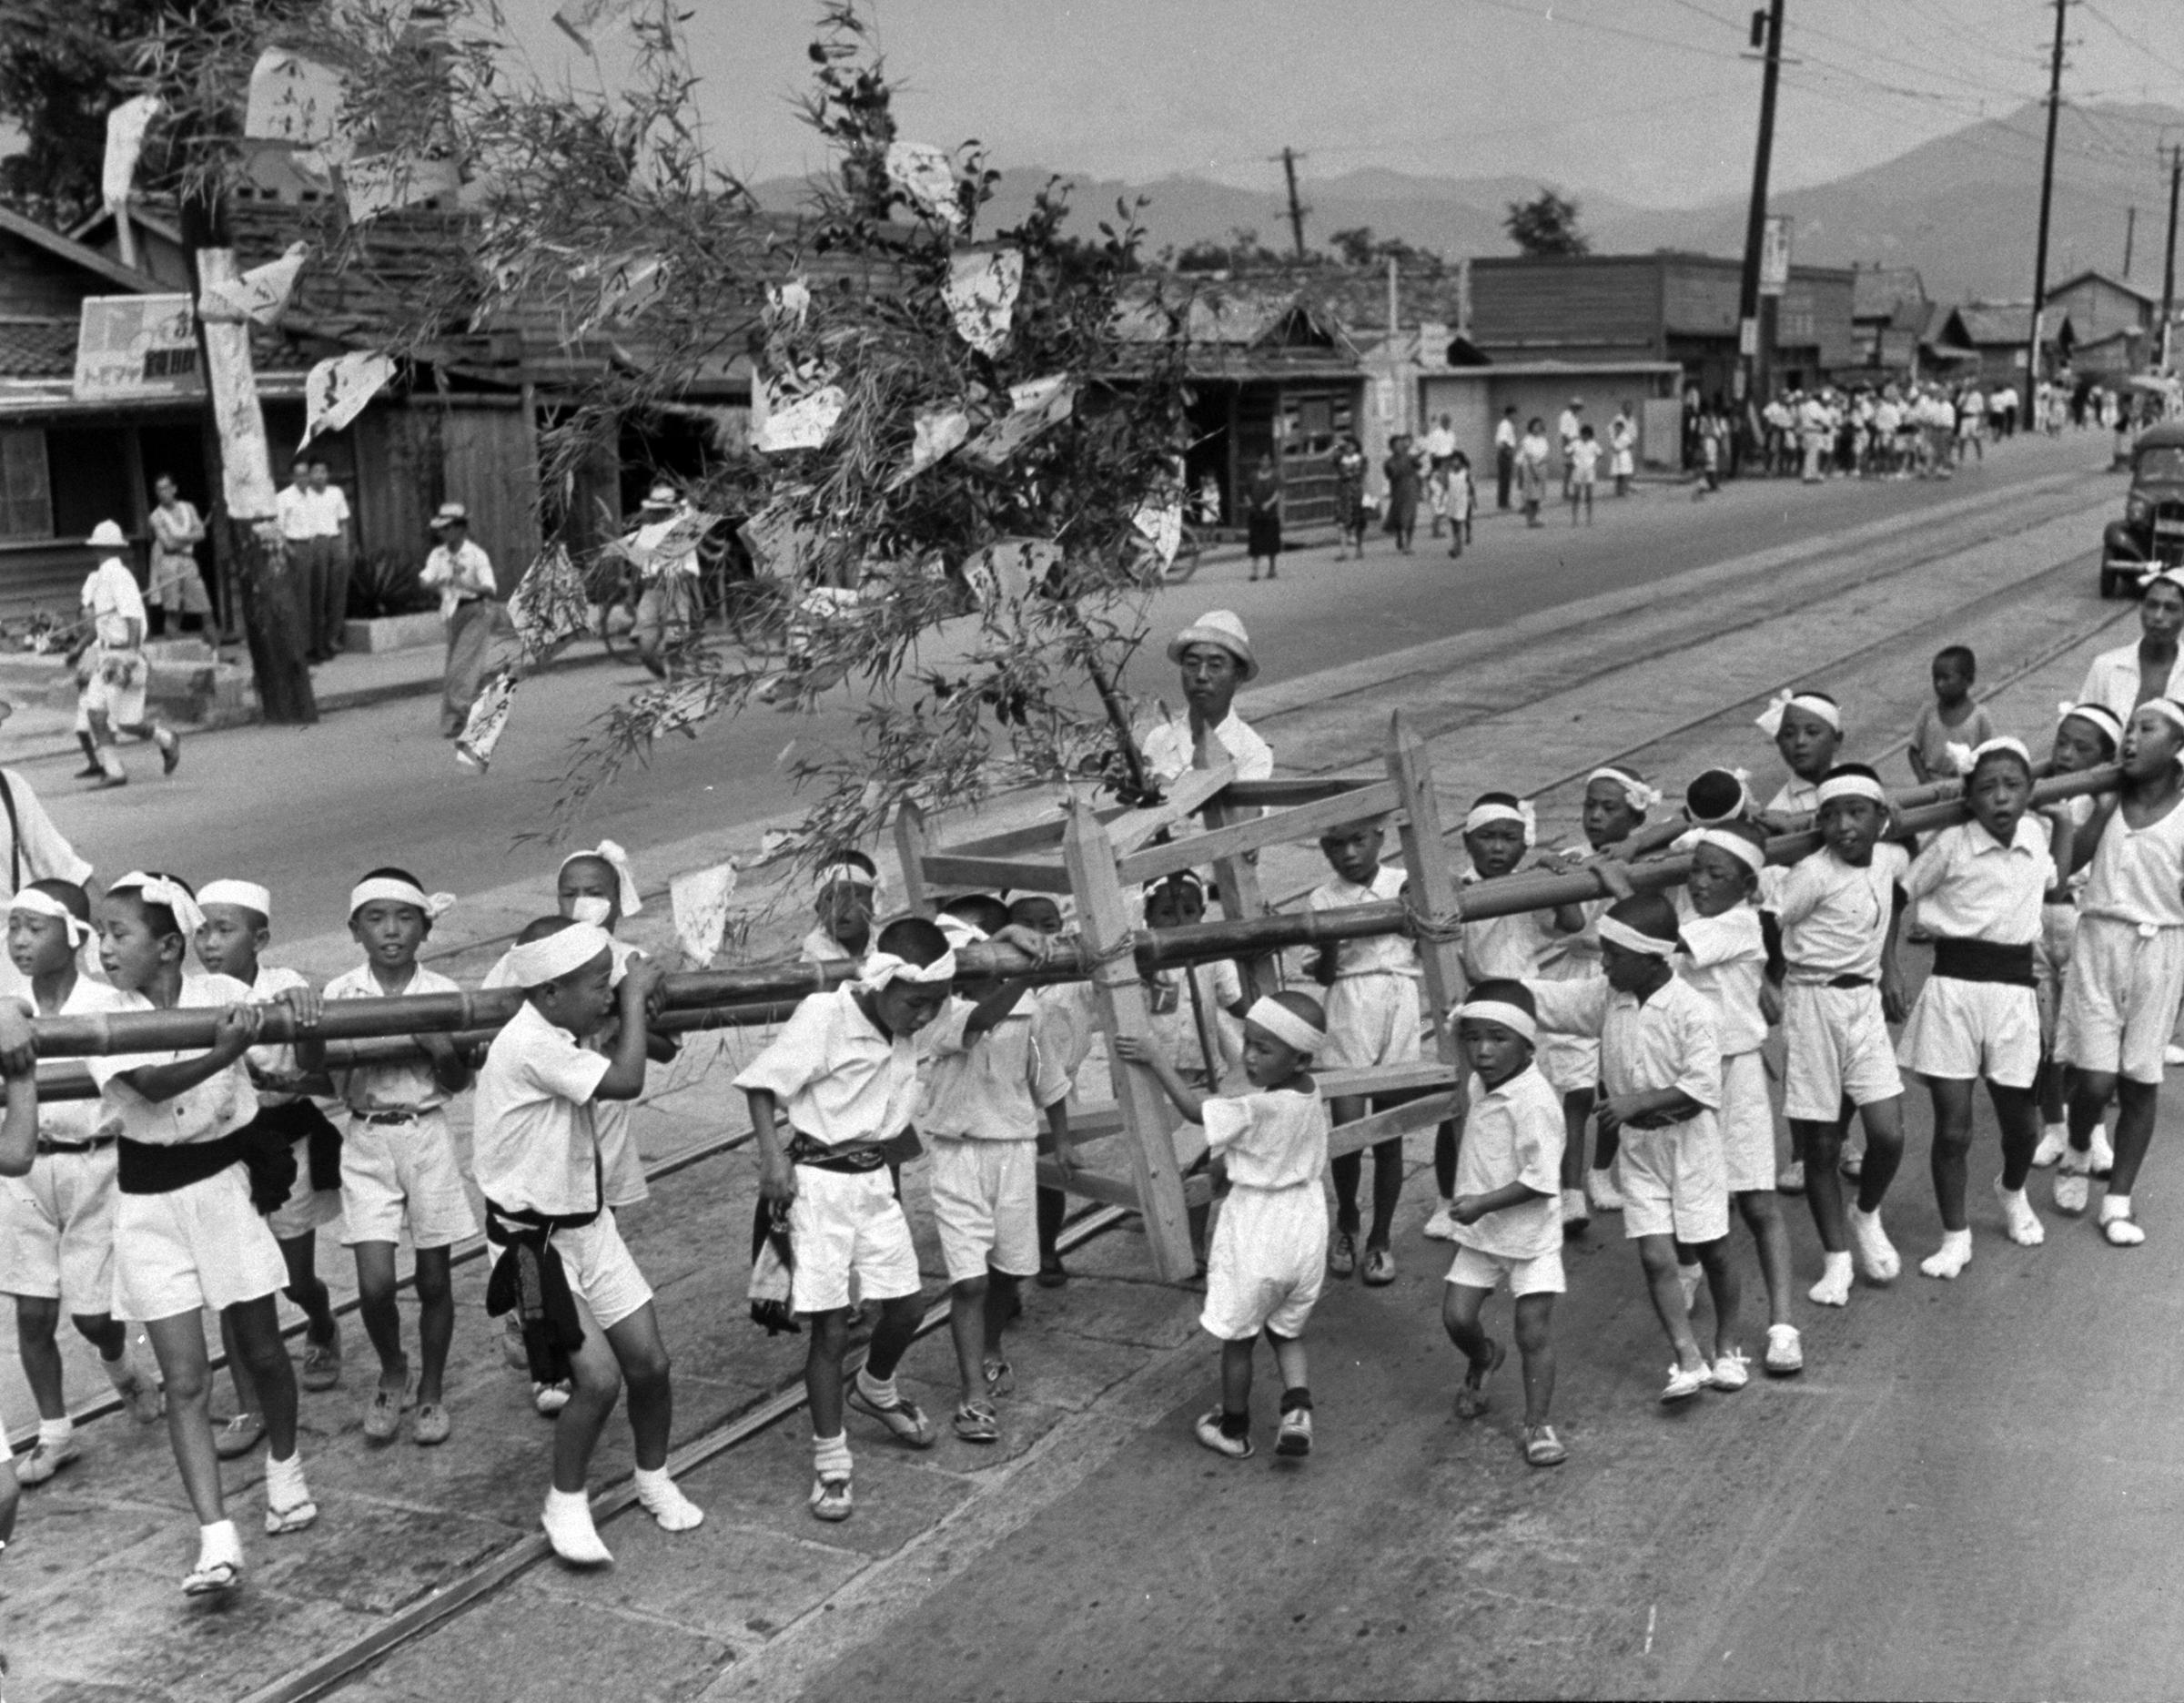 Boys carrying tree float in parade during Peace Festival in Hiroshima on anniversary of bomb dropping.